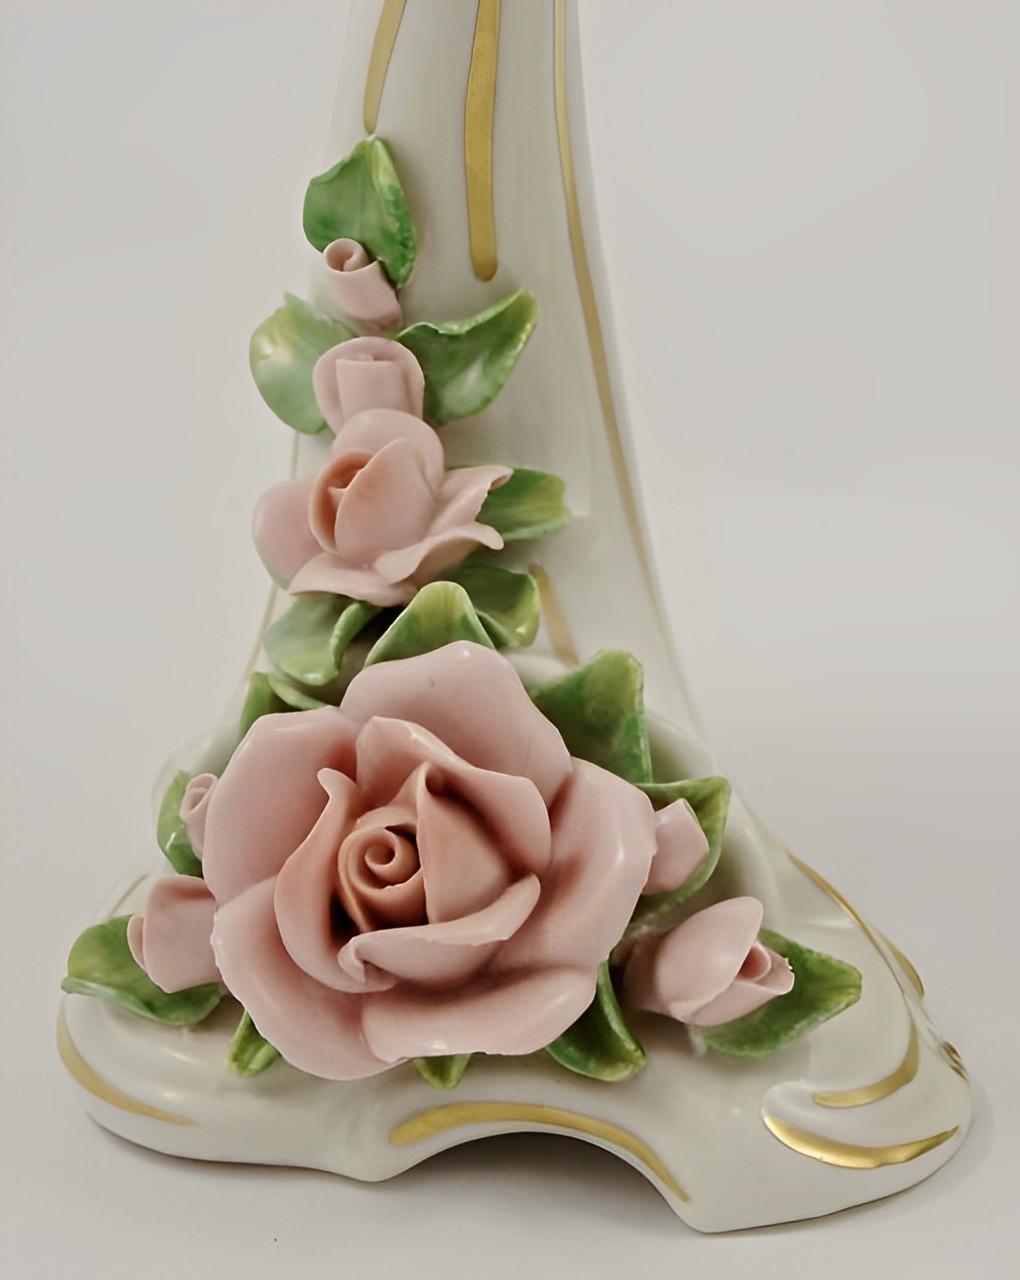 Alka Kunst Dresden beautiful pair of porcelain candlesticks with hand painted pink roses and leaves, and gold edging.

The candlesticks are height 18.7 cm / 7.36 inches, and width of the base is 9 cm / 3.5 inches. They are in very good condition.